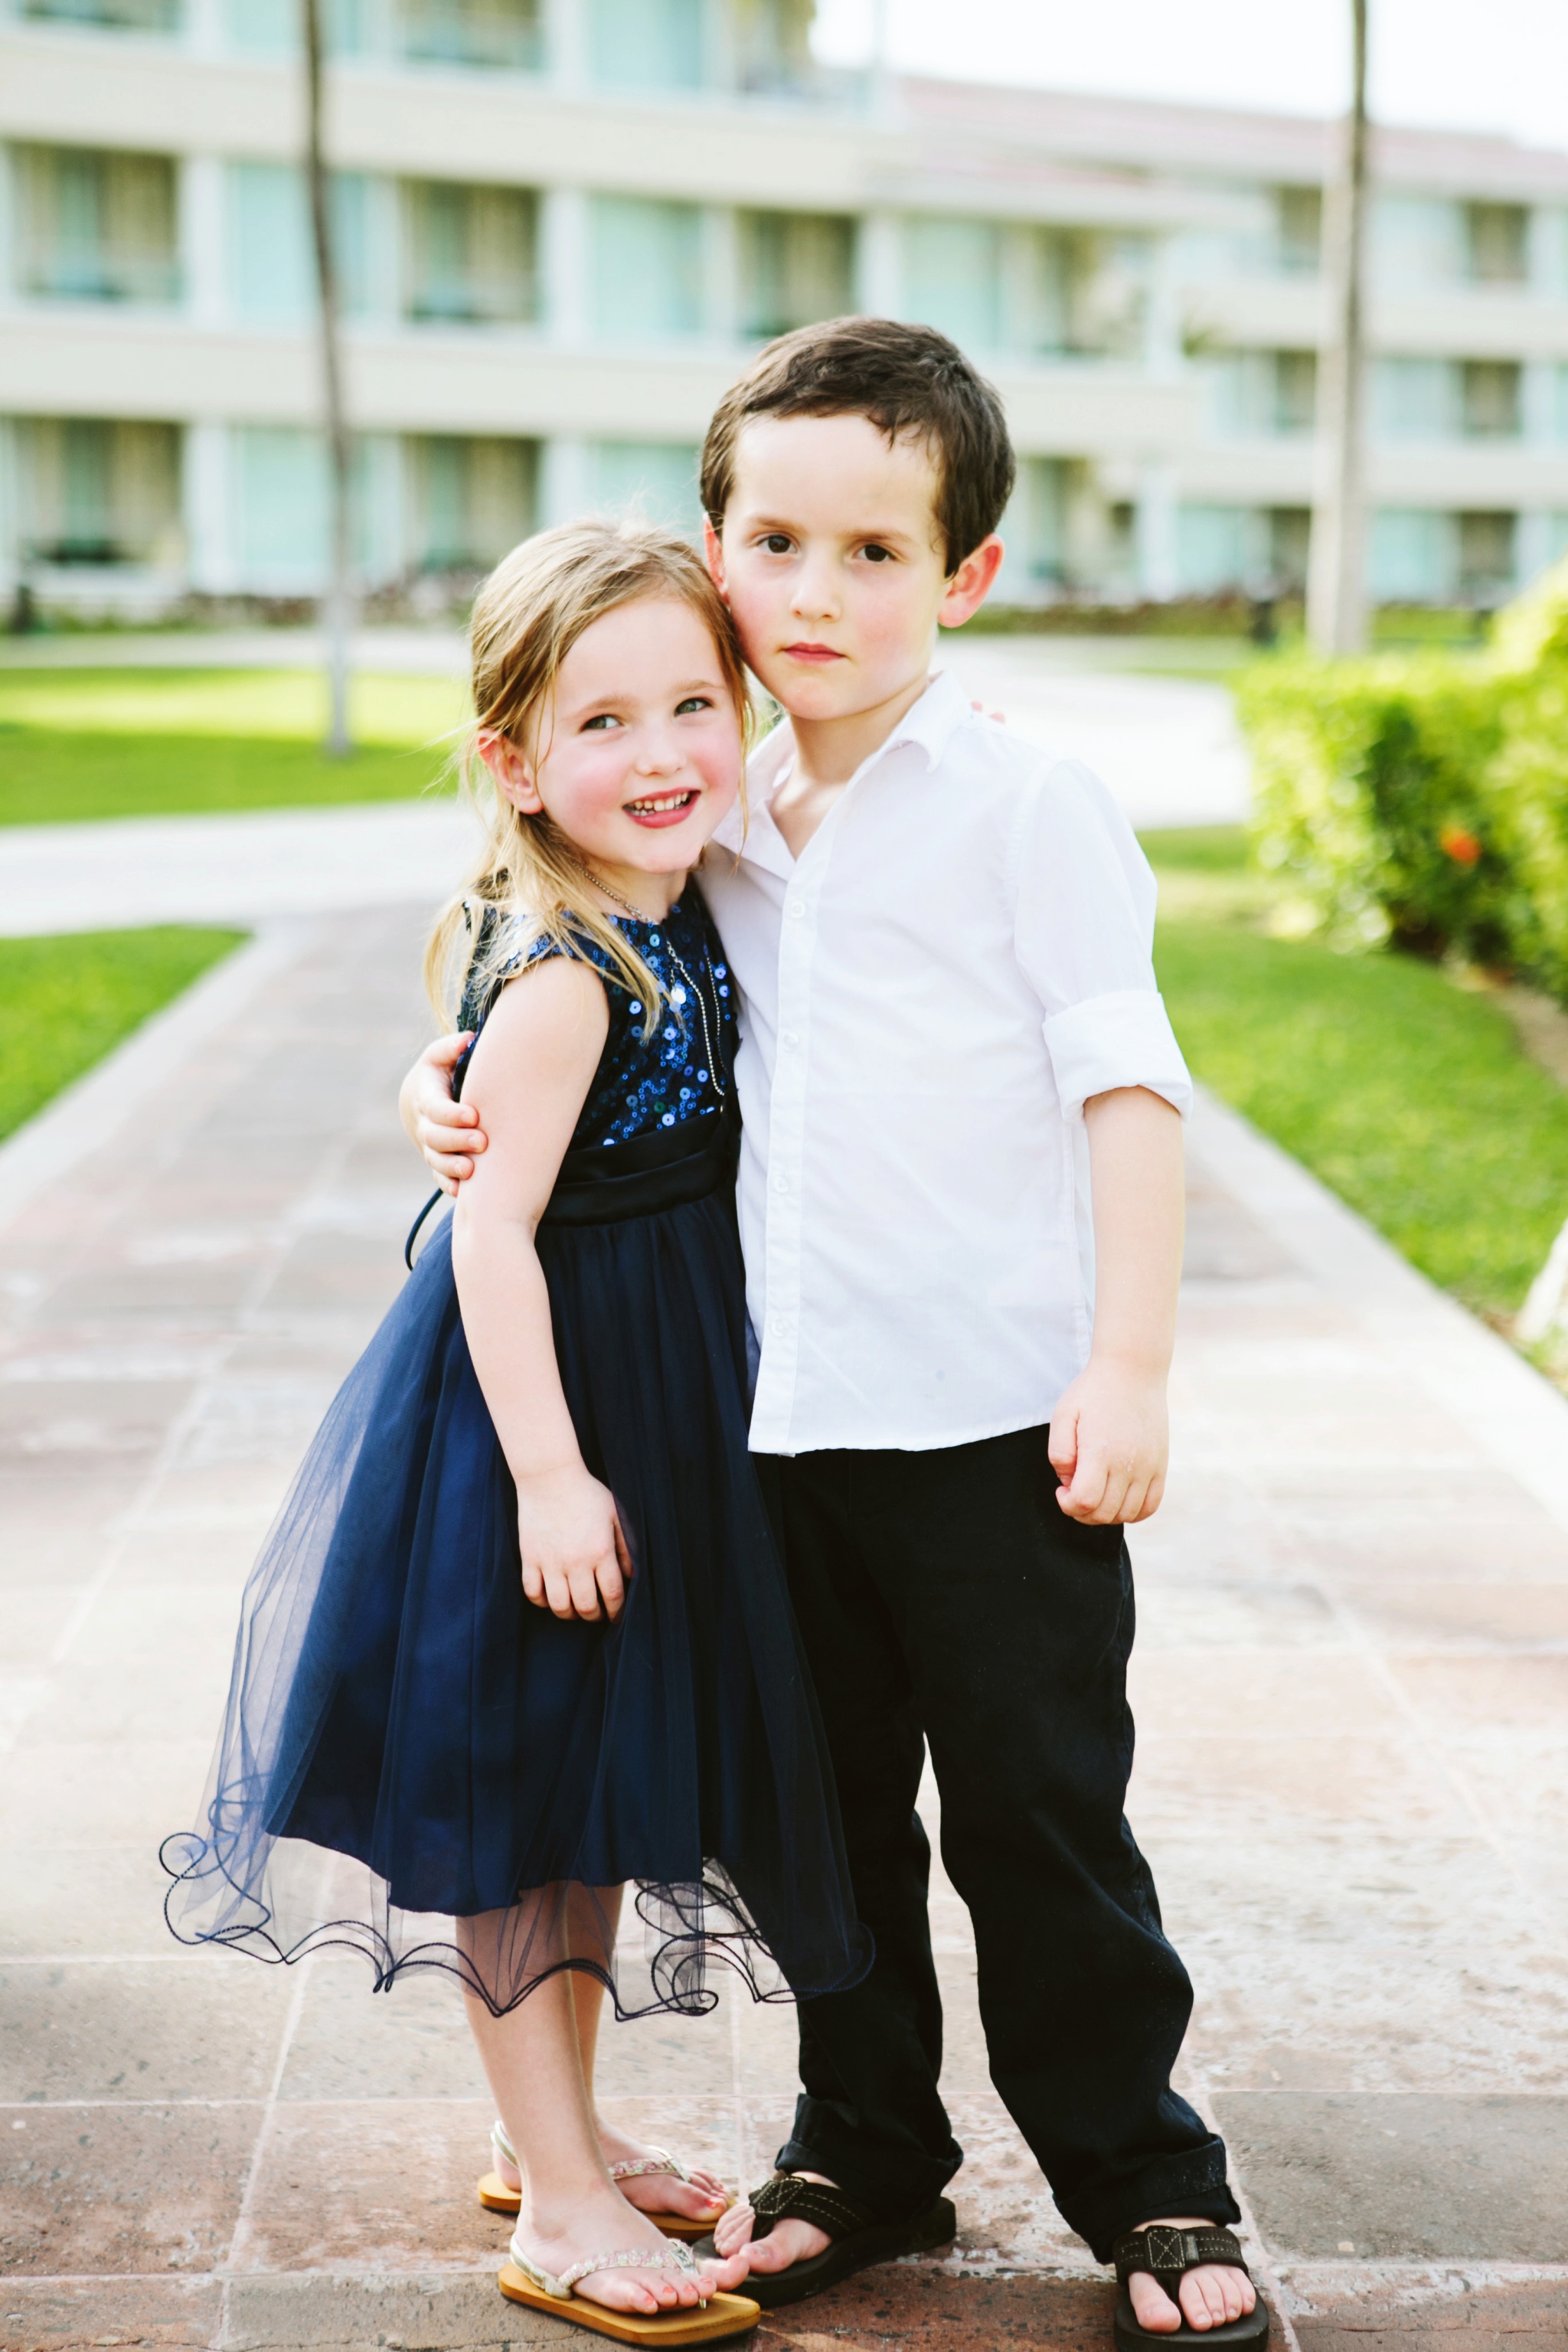 Moon Palace Resort Cancun Mexico Wedding Photos Flower Girl and Ringbearer